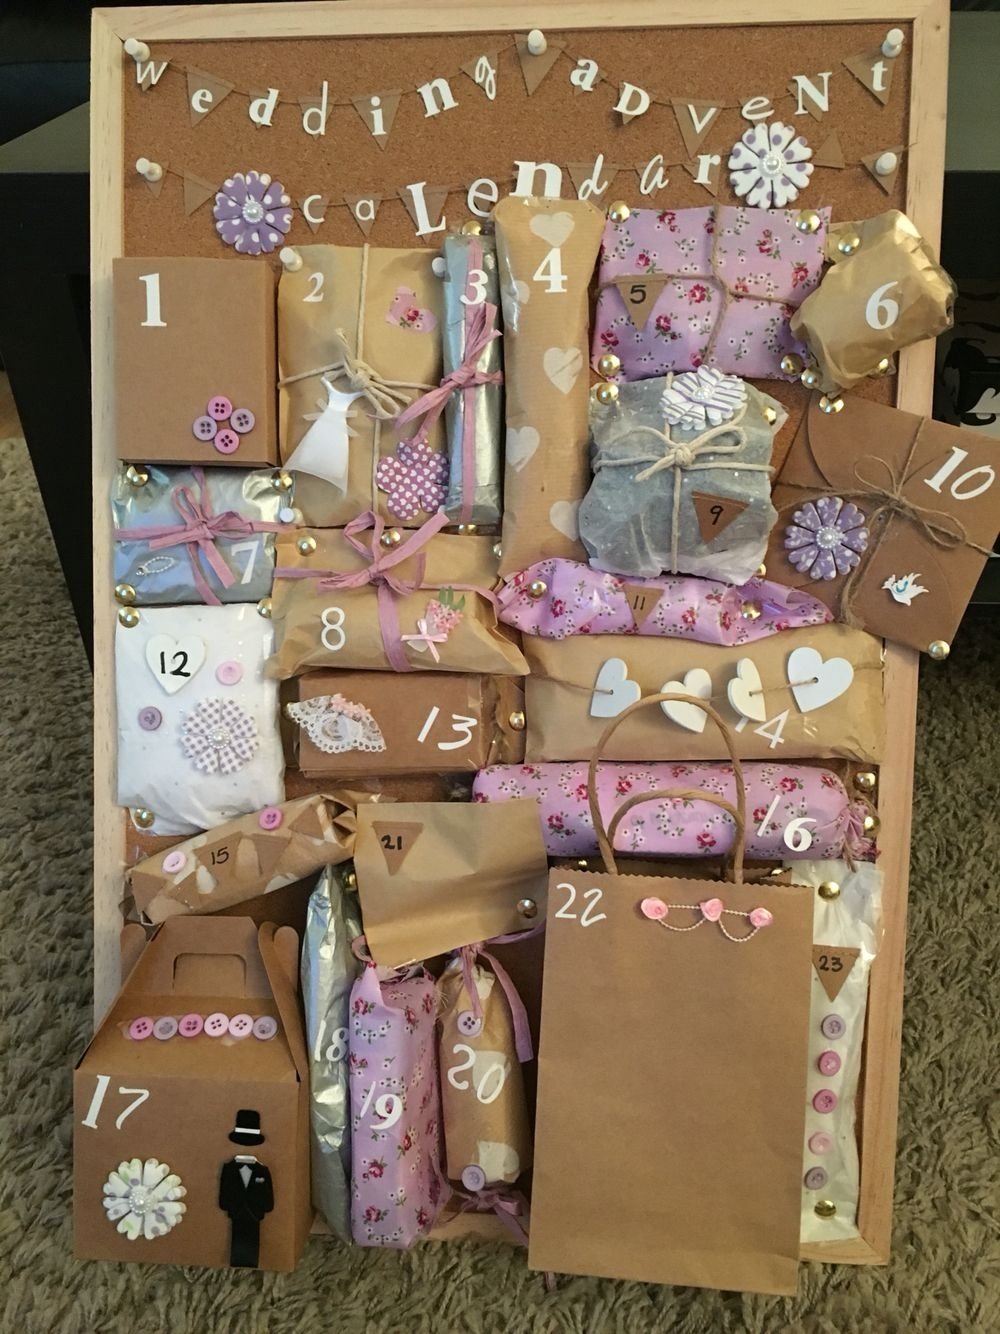 10 Lovable Present Ideas For Best Friends made this wedding advent calendar for my best friend who is getting 2022